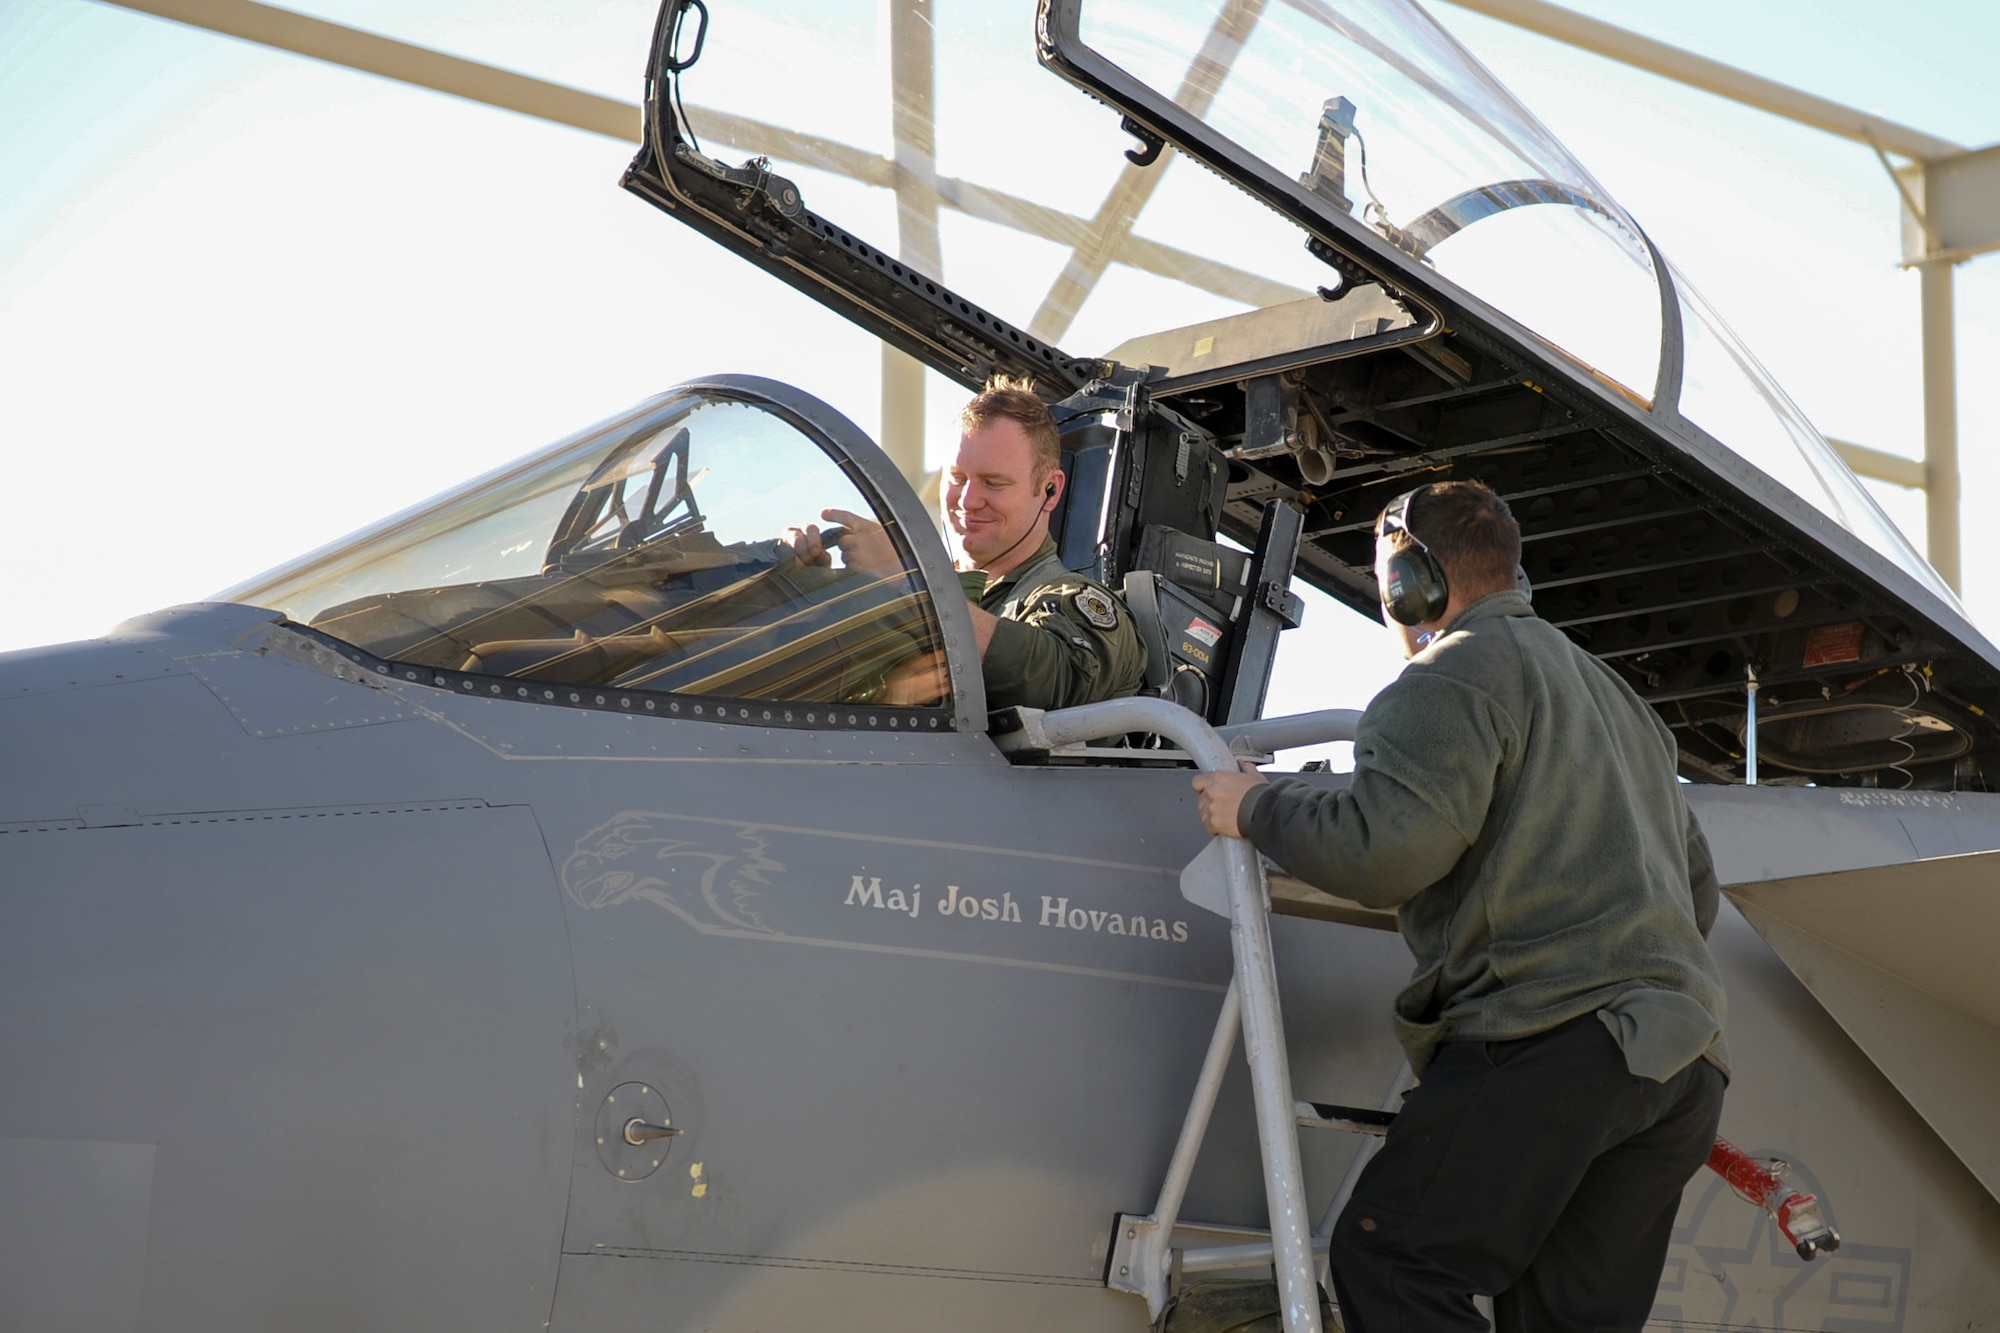 Maj. Cody Clark, 433rd Weapons Squadron F-15 pilot, is greeted by Airman 1st Class Thatcher Gore, 757th Aircraft Maintenance Squadron Eagle Maintenance Unit crew chief, after a sortie in which aircraft 83-3014 hit 10,000 flight hours at Nellis Air Force Base, Nev., Jan. 25, 2017. Although the Air Force’s F-15 fleet is more than 30 years old, only a handful of the C/D/E aircraft are believed to be in the 10,000 hour club. (U.S. Air Force photo by Staff Sgt. Siuta B. Ika)